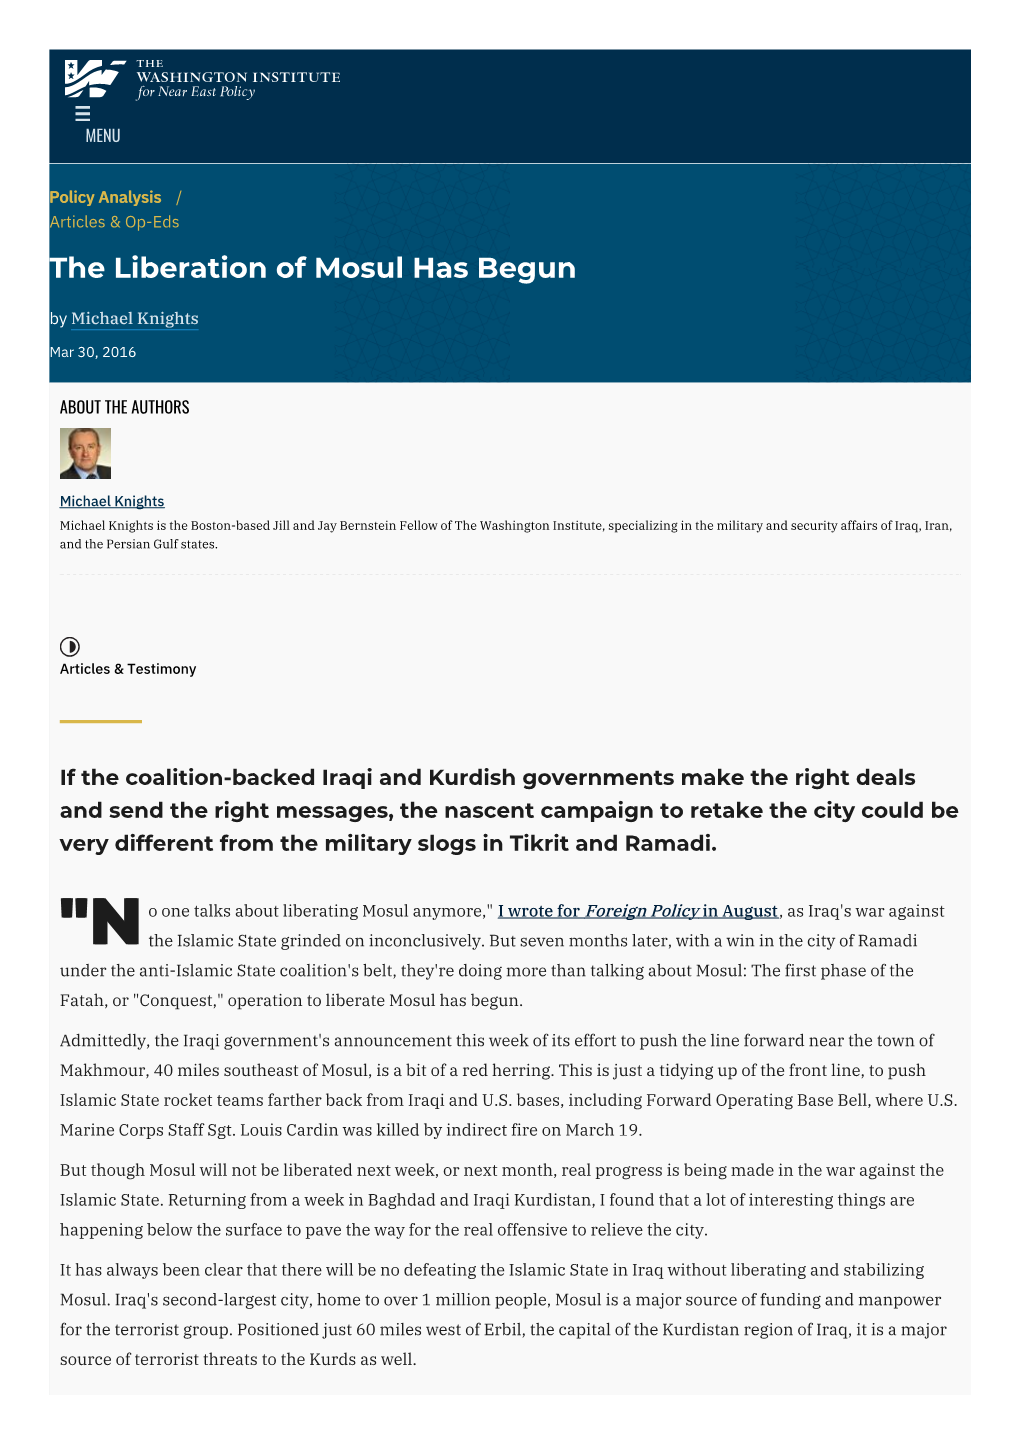 The Liberation of Mosul Has Begun | the Washington Institute